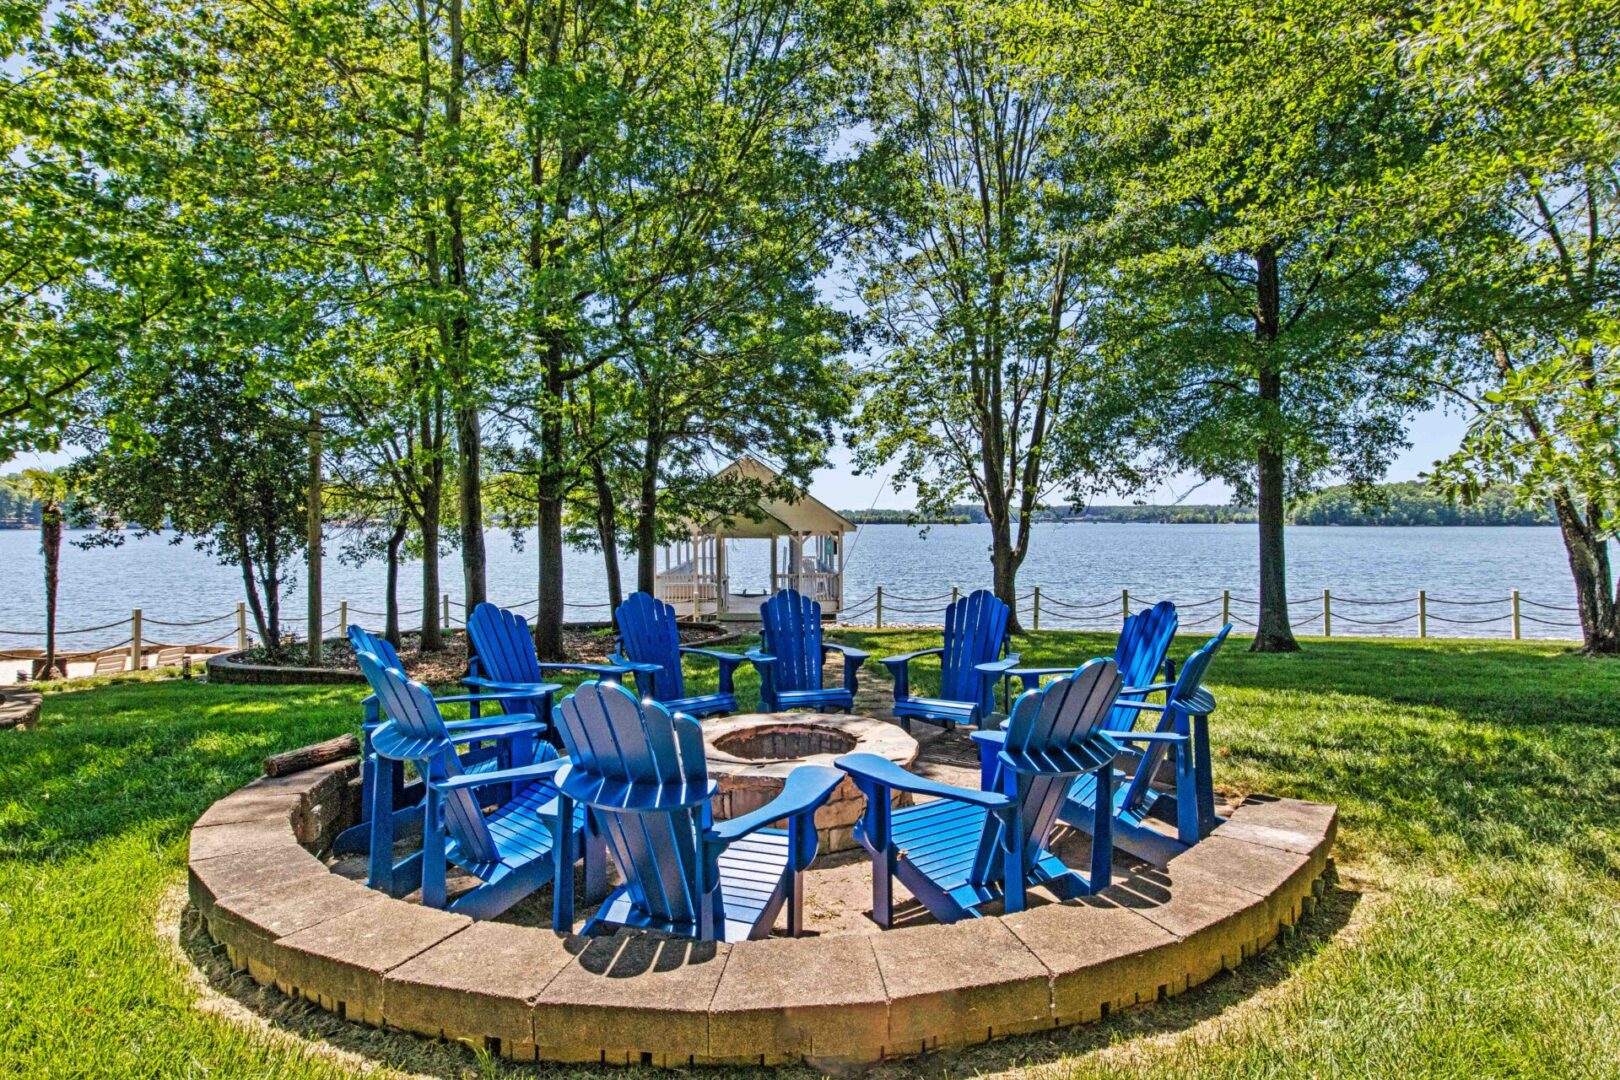 A group of blue chairs around a fire pit.